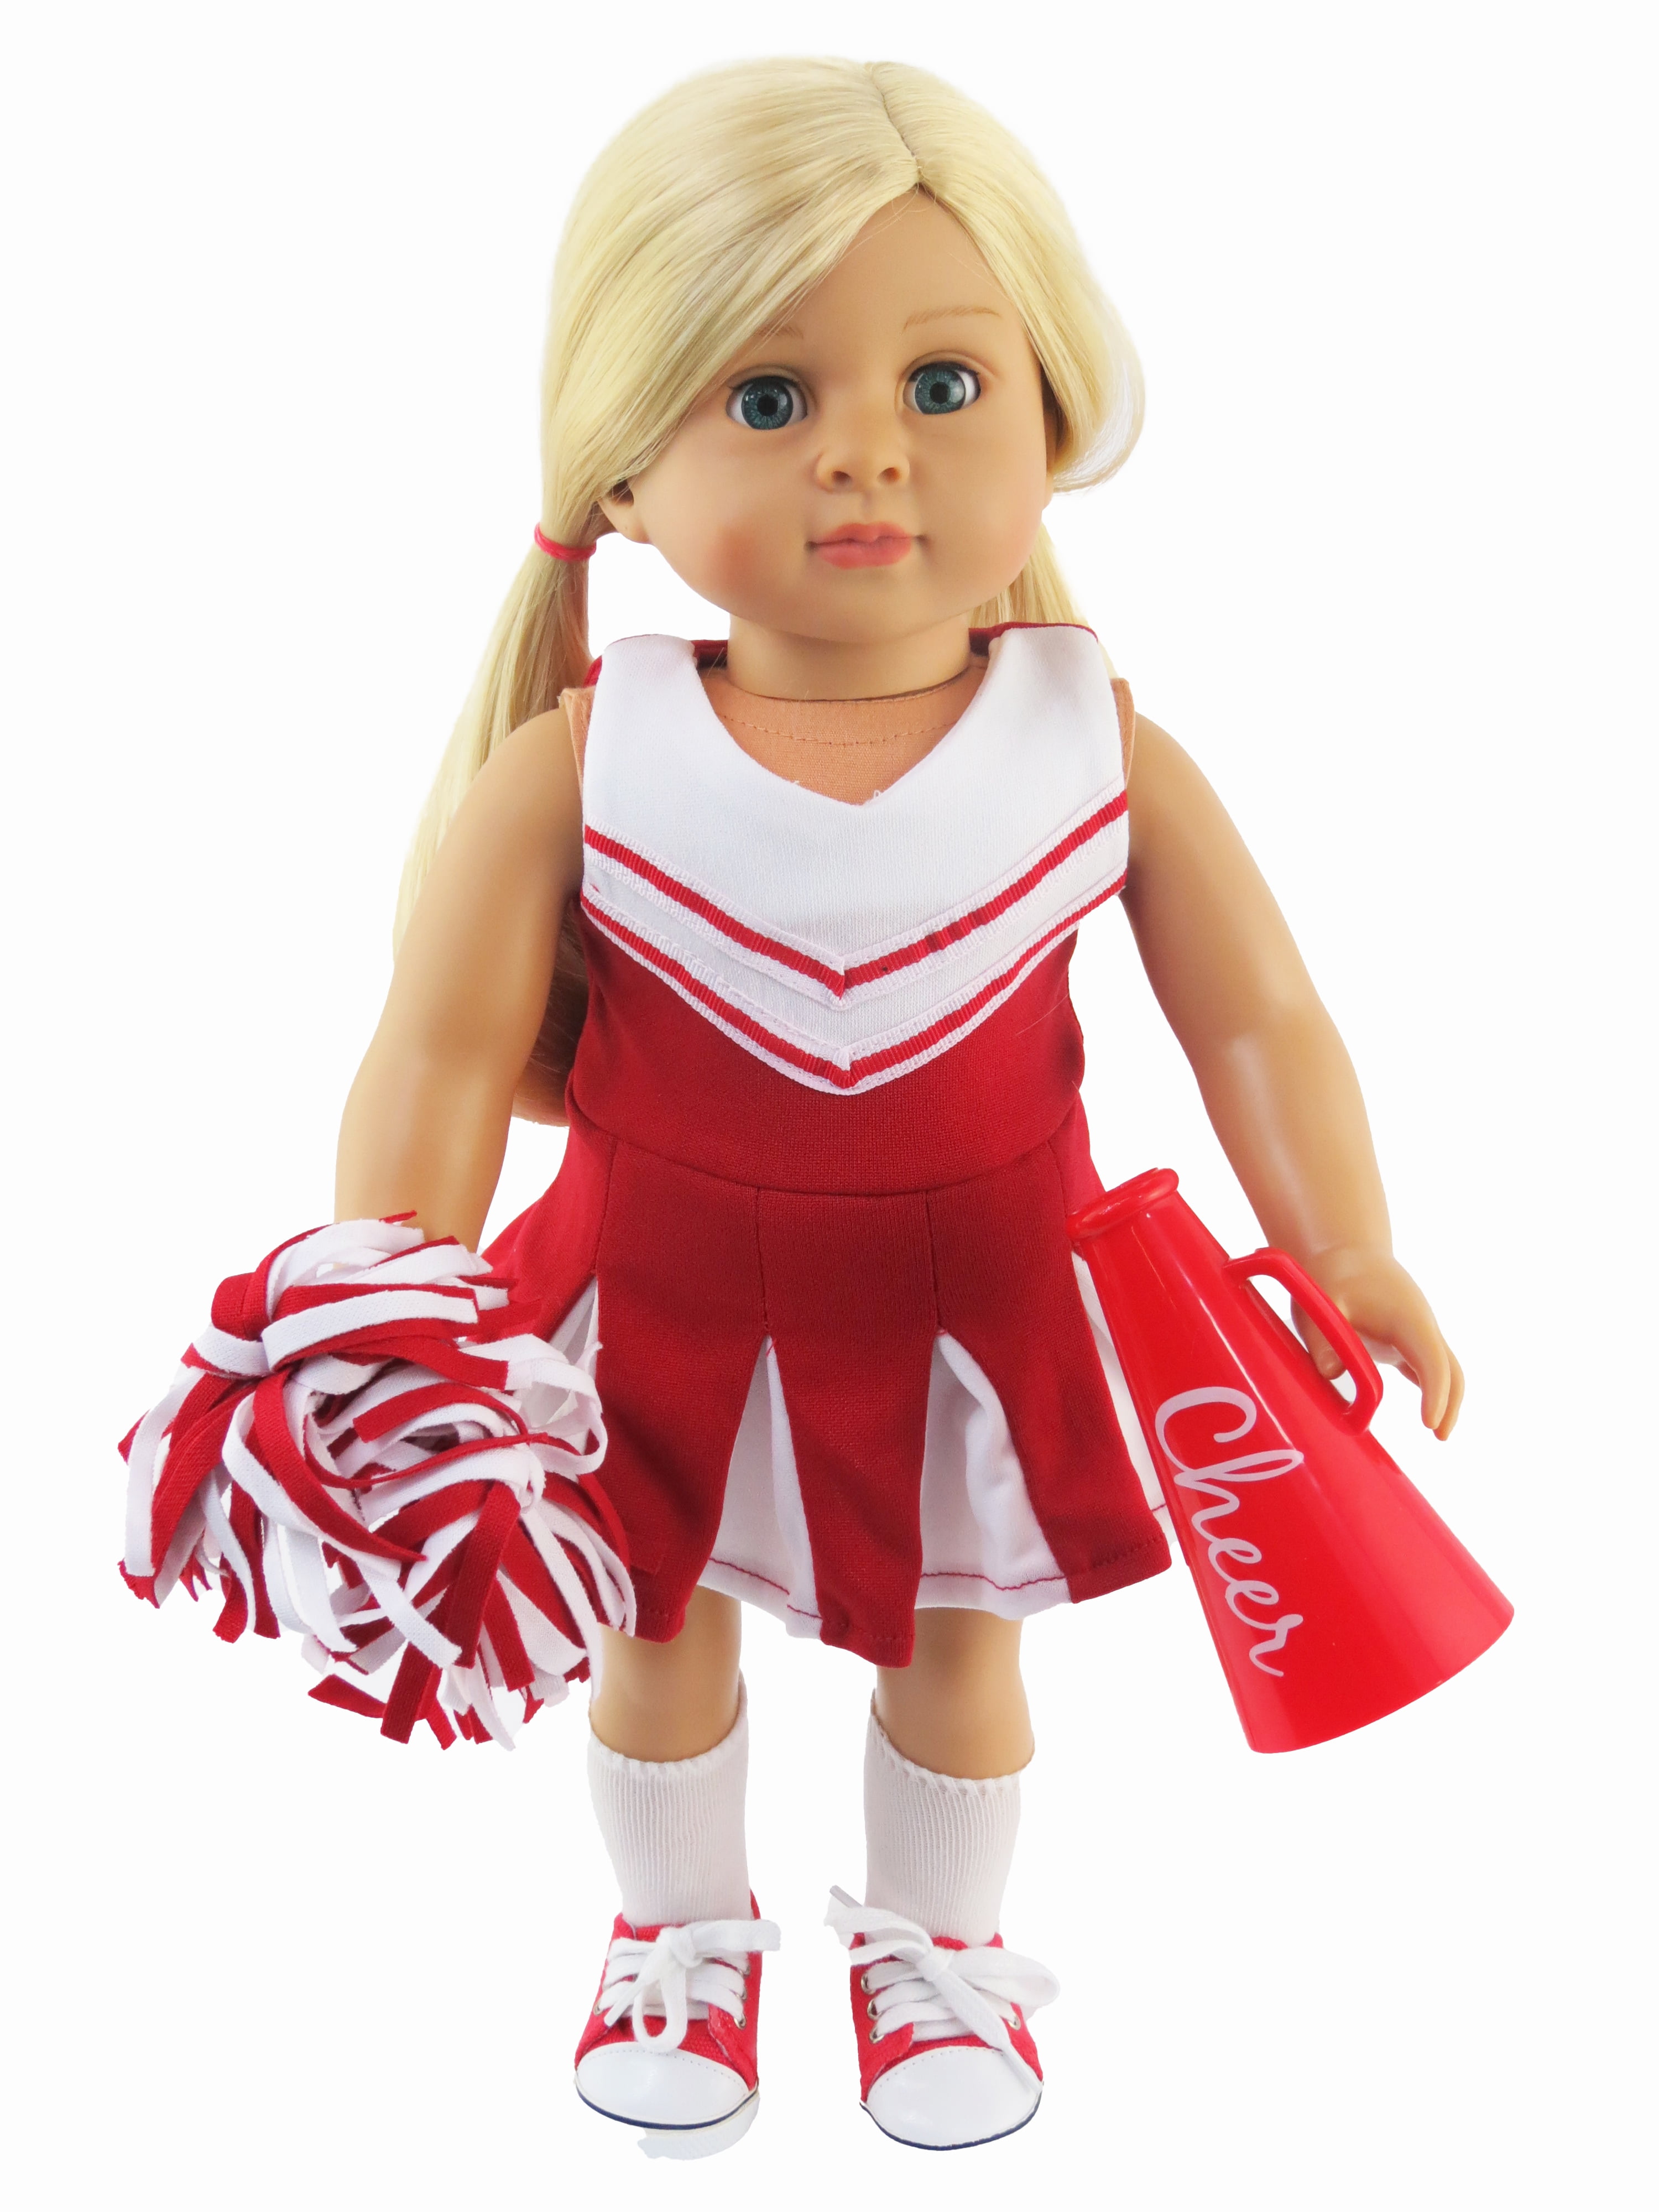 Personalized Cheerleader Outfit Set for Girl 18" Doll navy made in America 